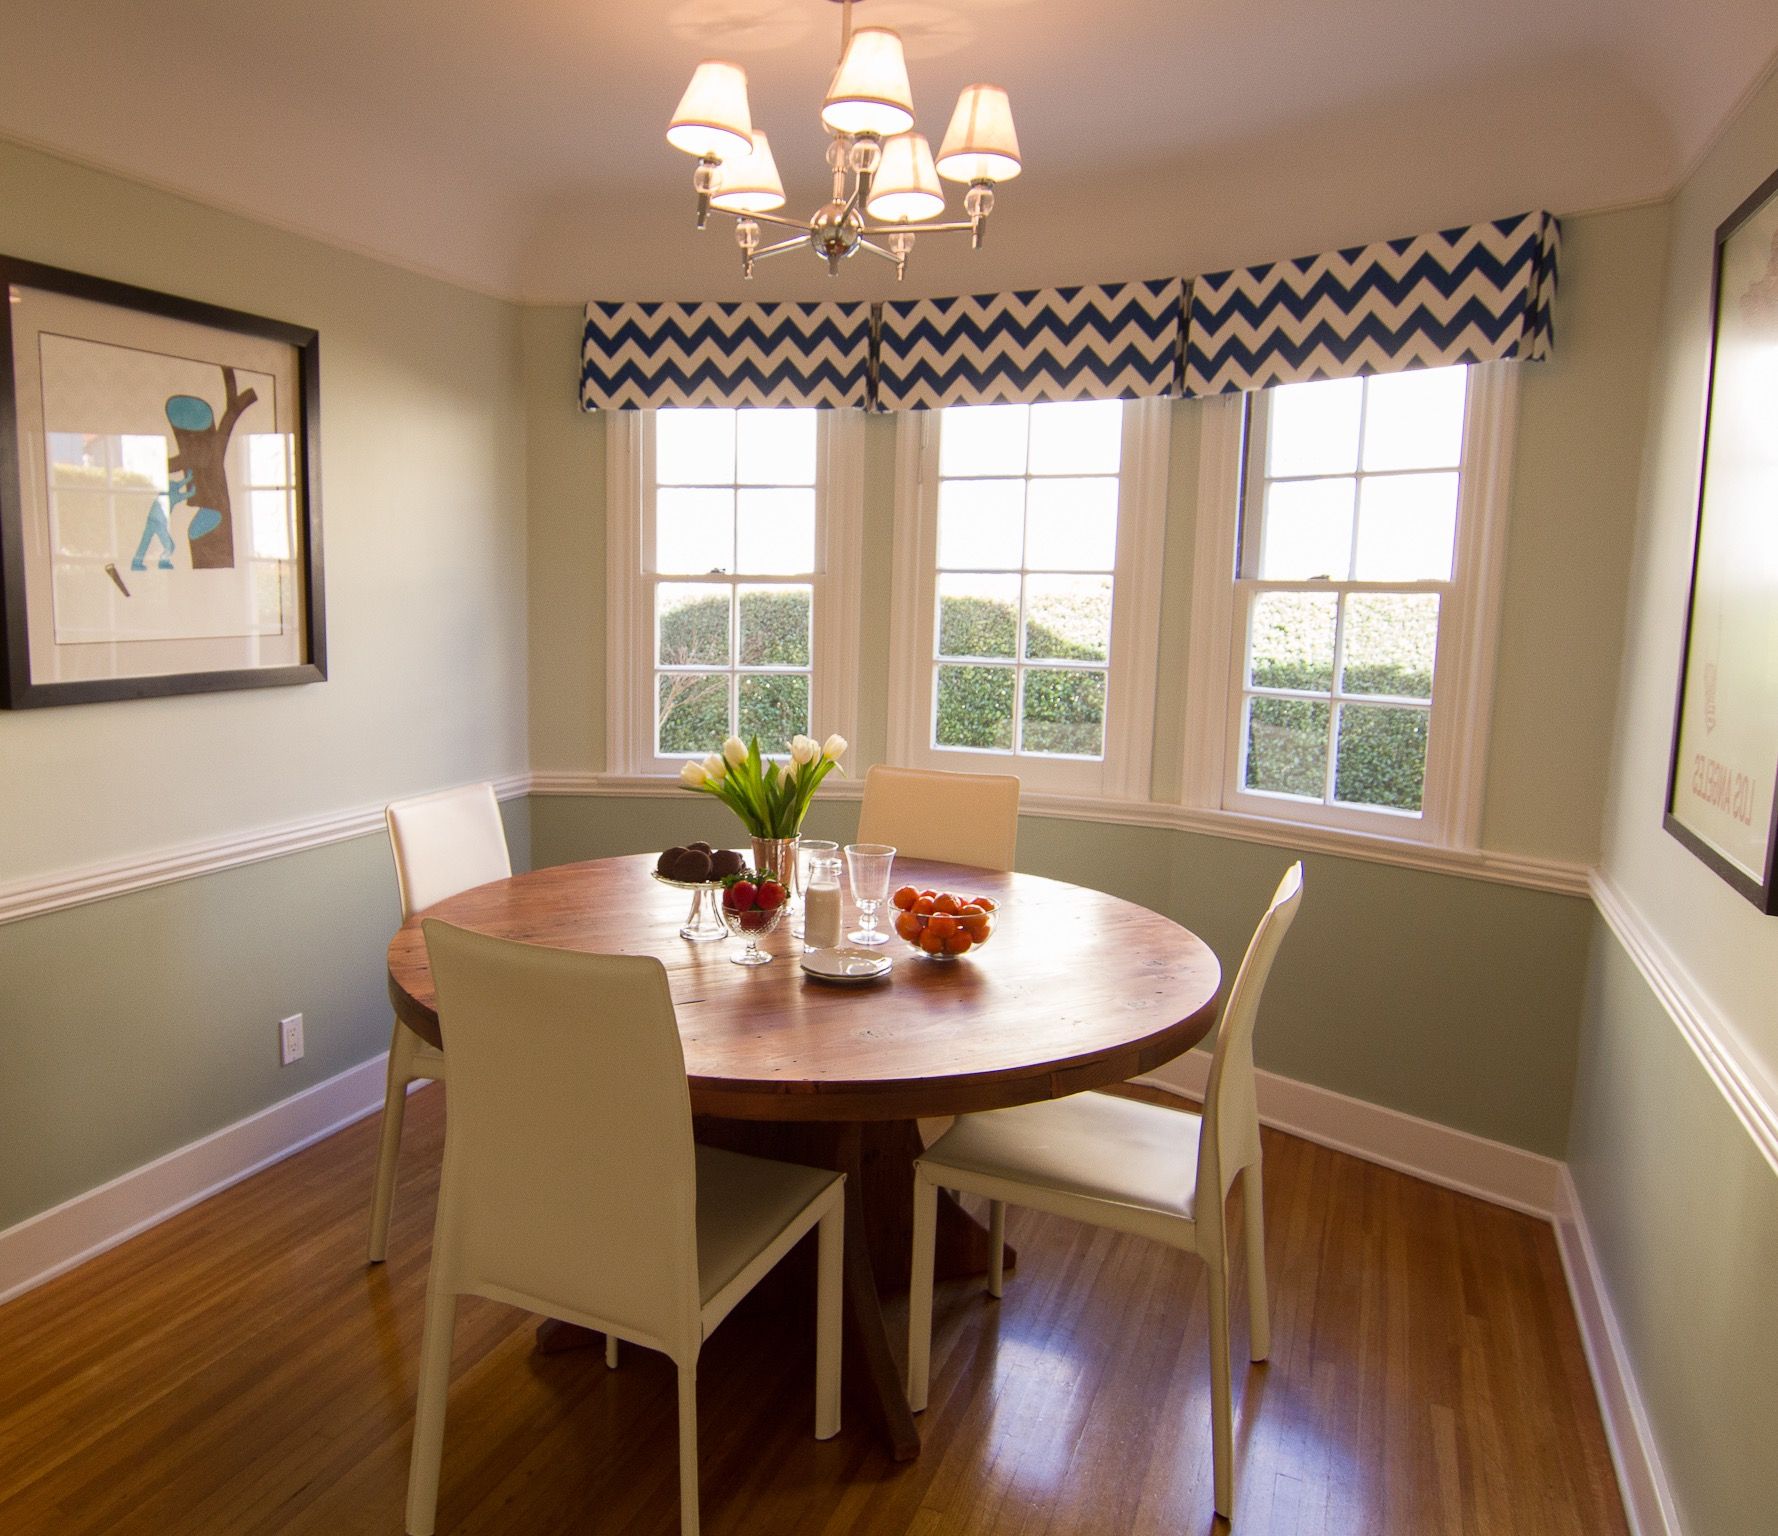 Small Formal Dining Room With Round Dining Table (View 15 of 18)